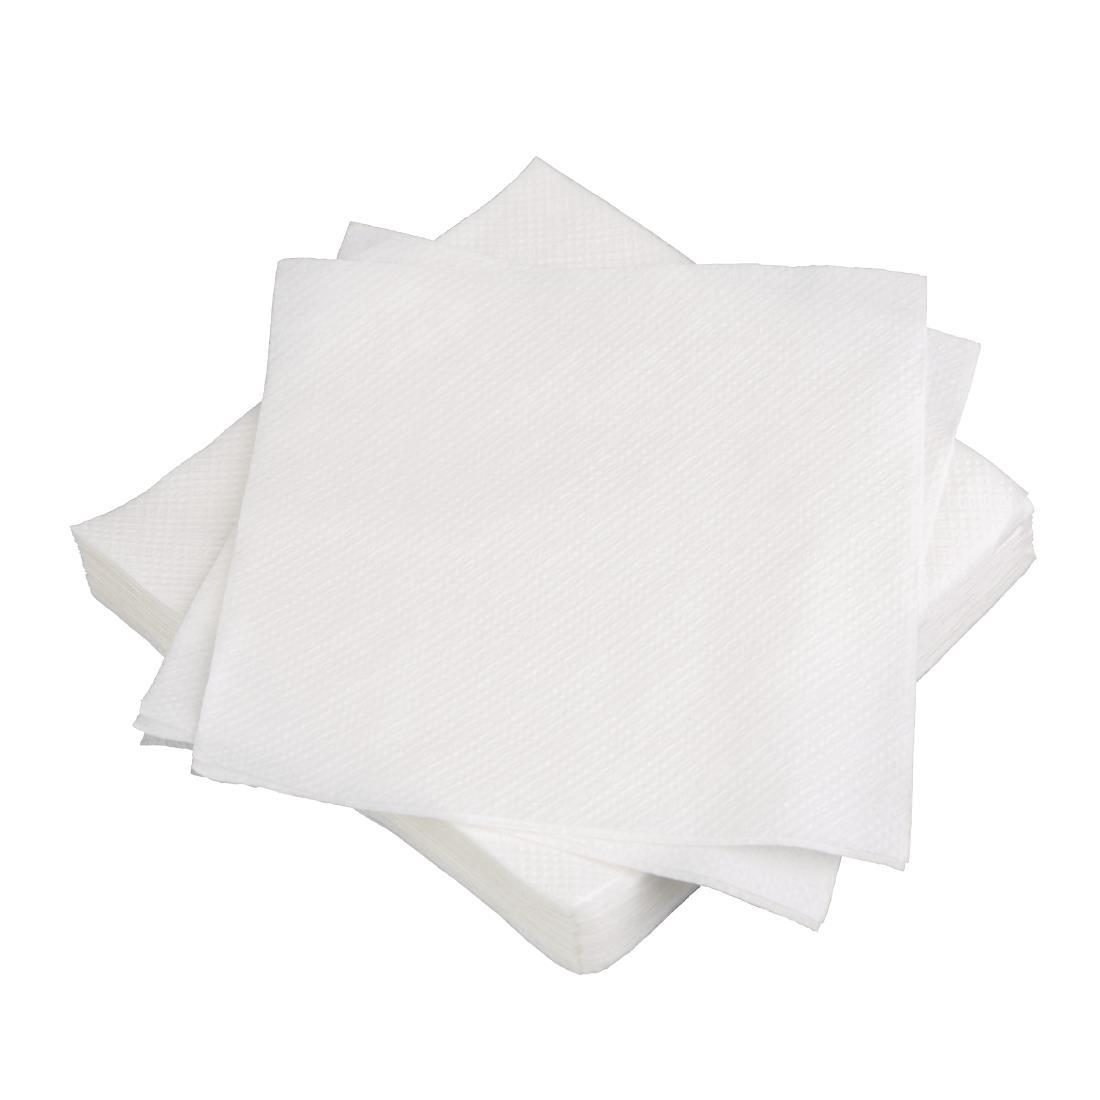 Fiesta Recyclable Cocktail Napkin White 24x24cm 1ply 1/4 Fold (Pack of 2000) - CM560  - 3